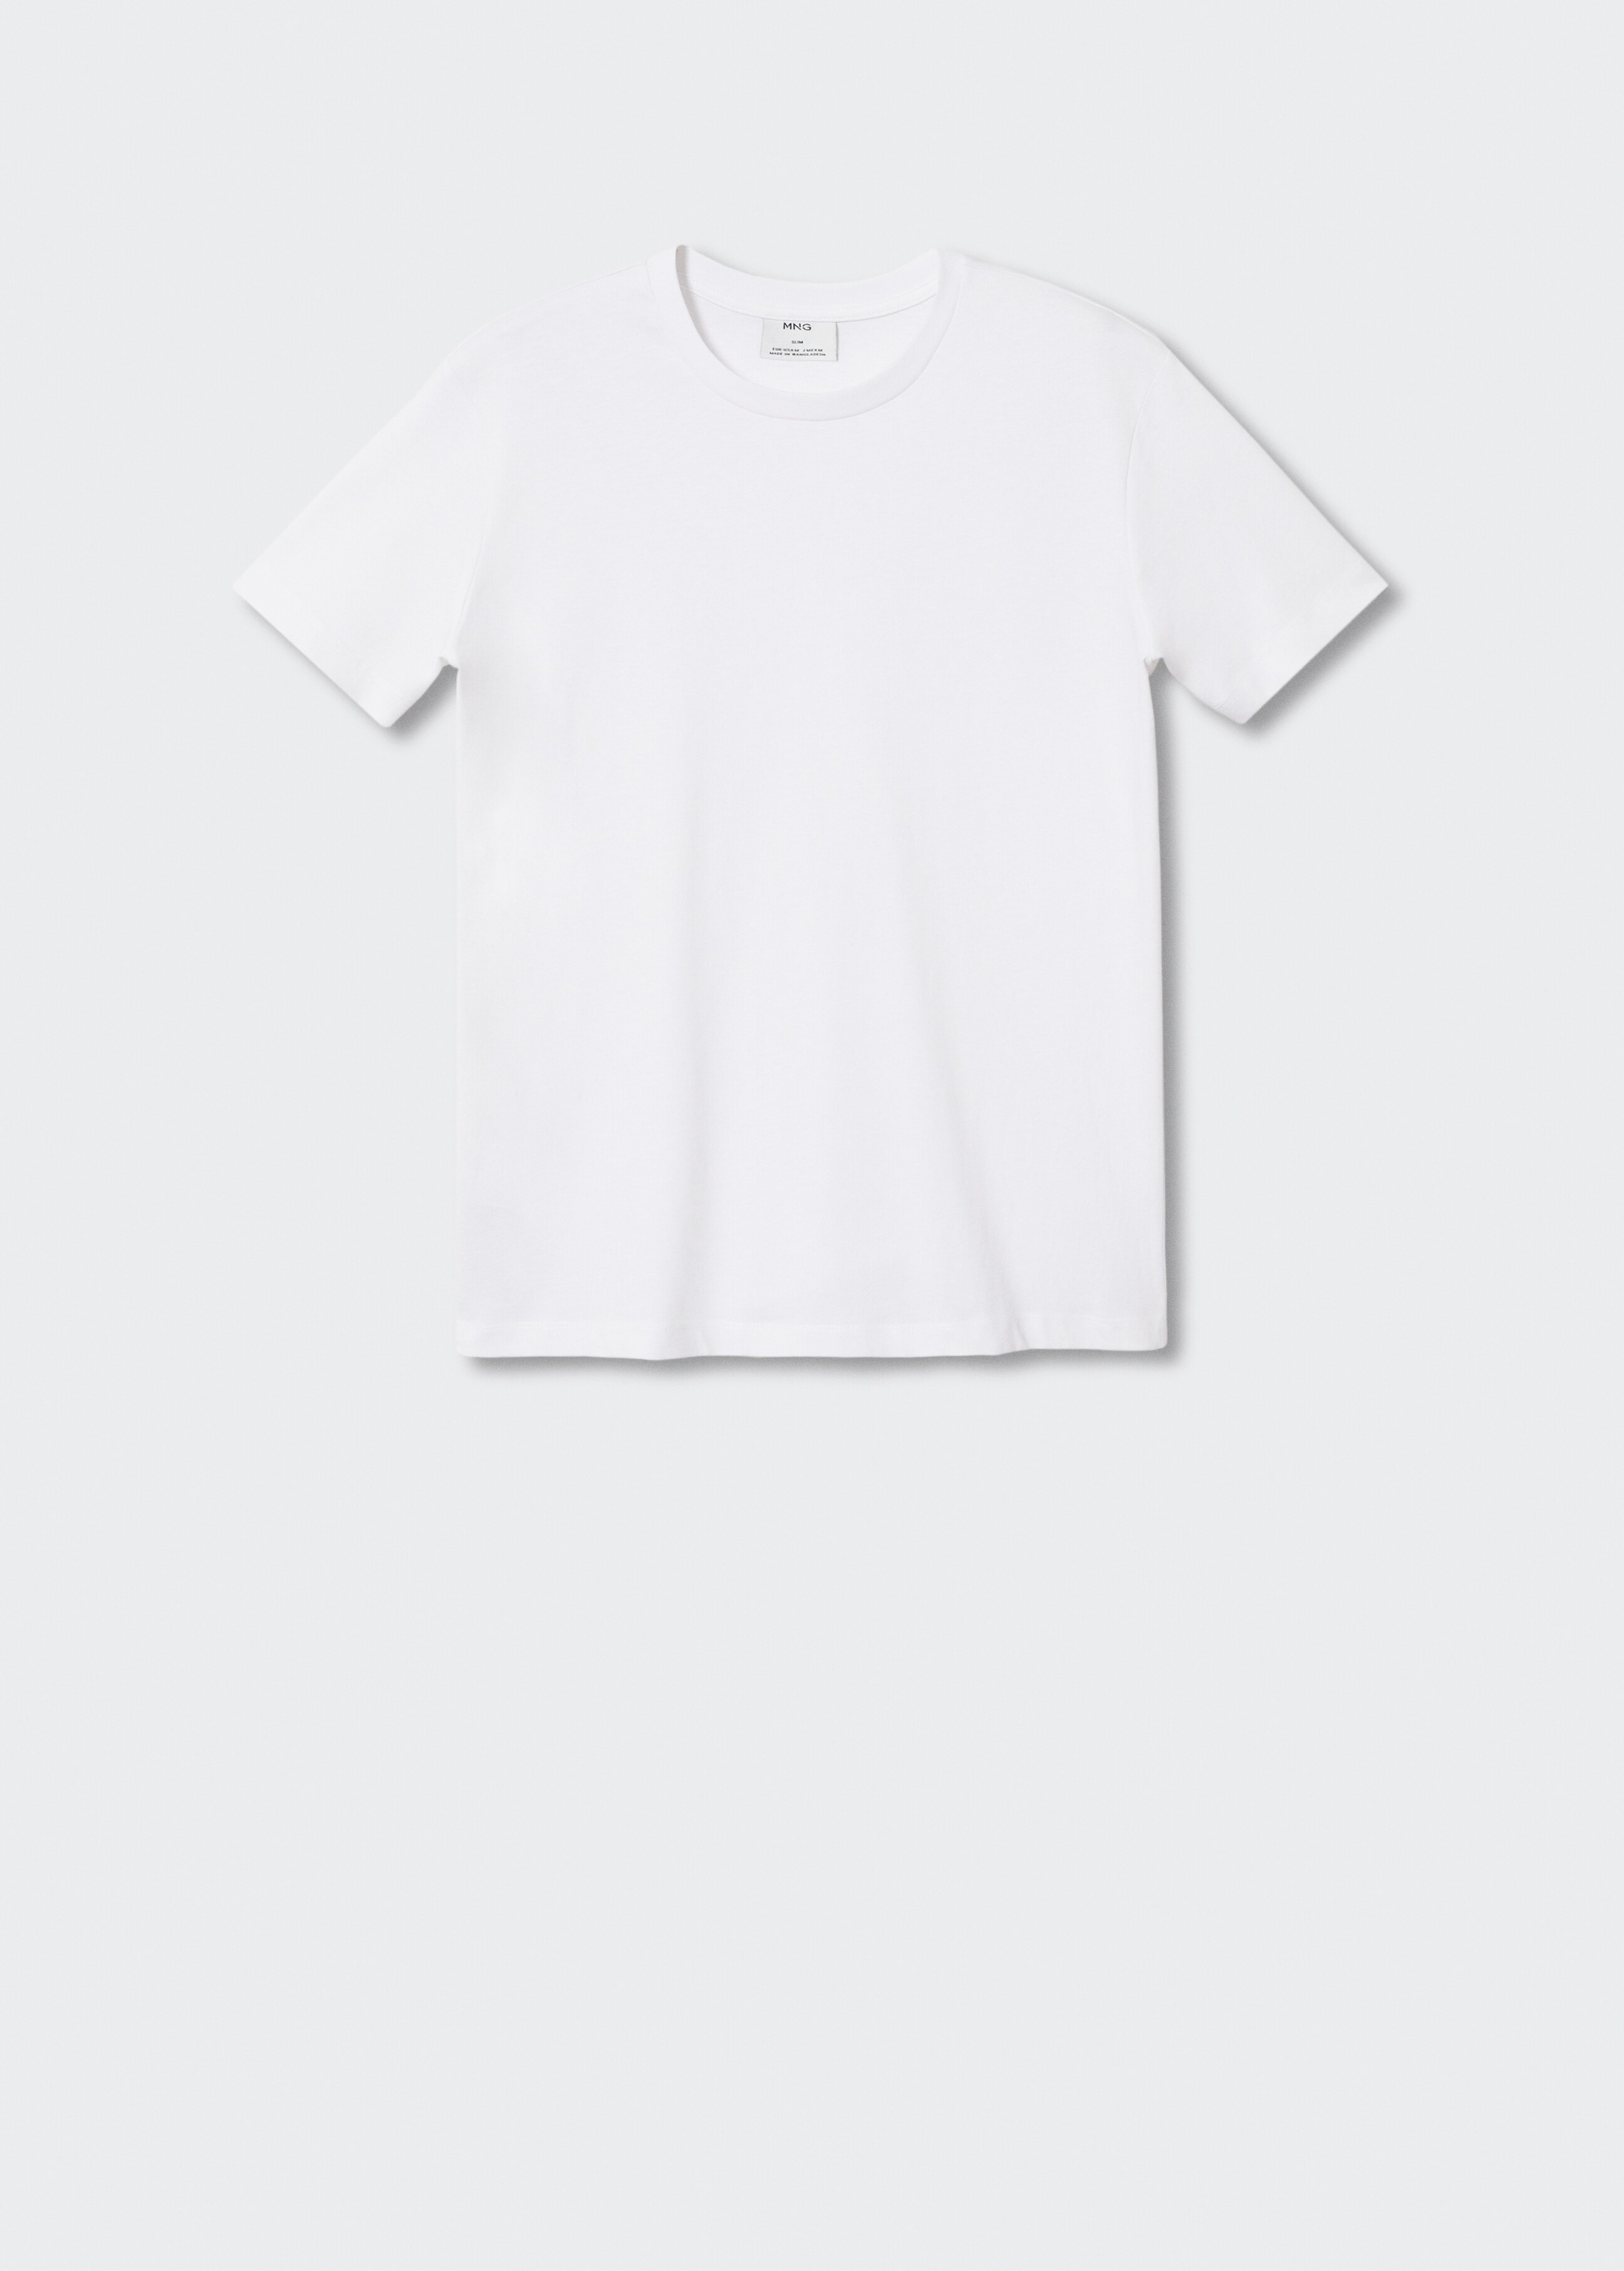 Basic lightweight cotton t-shirt - Article without model